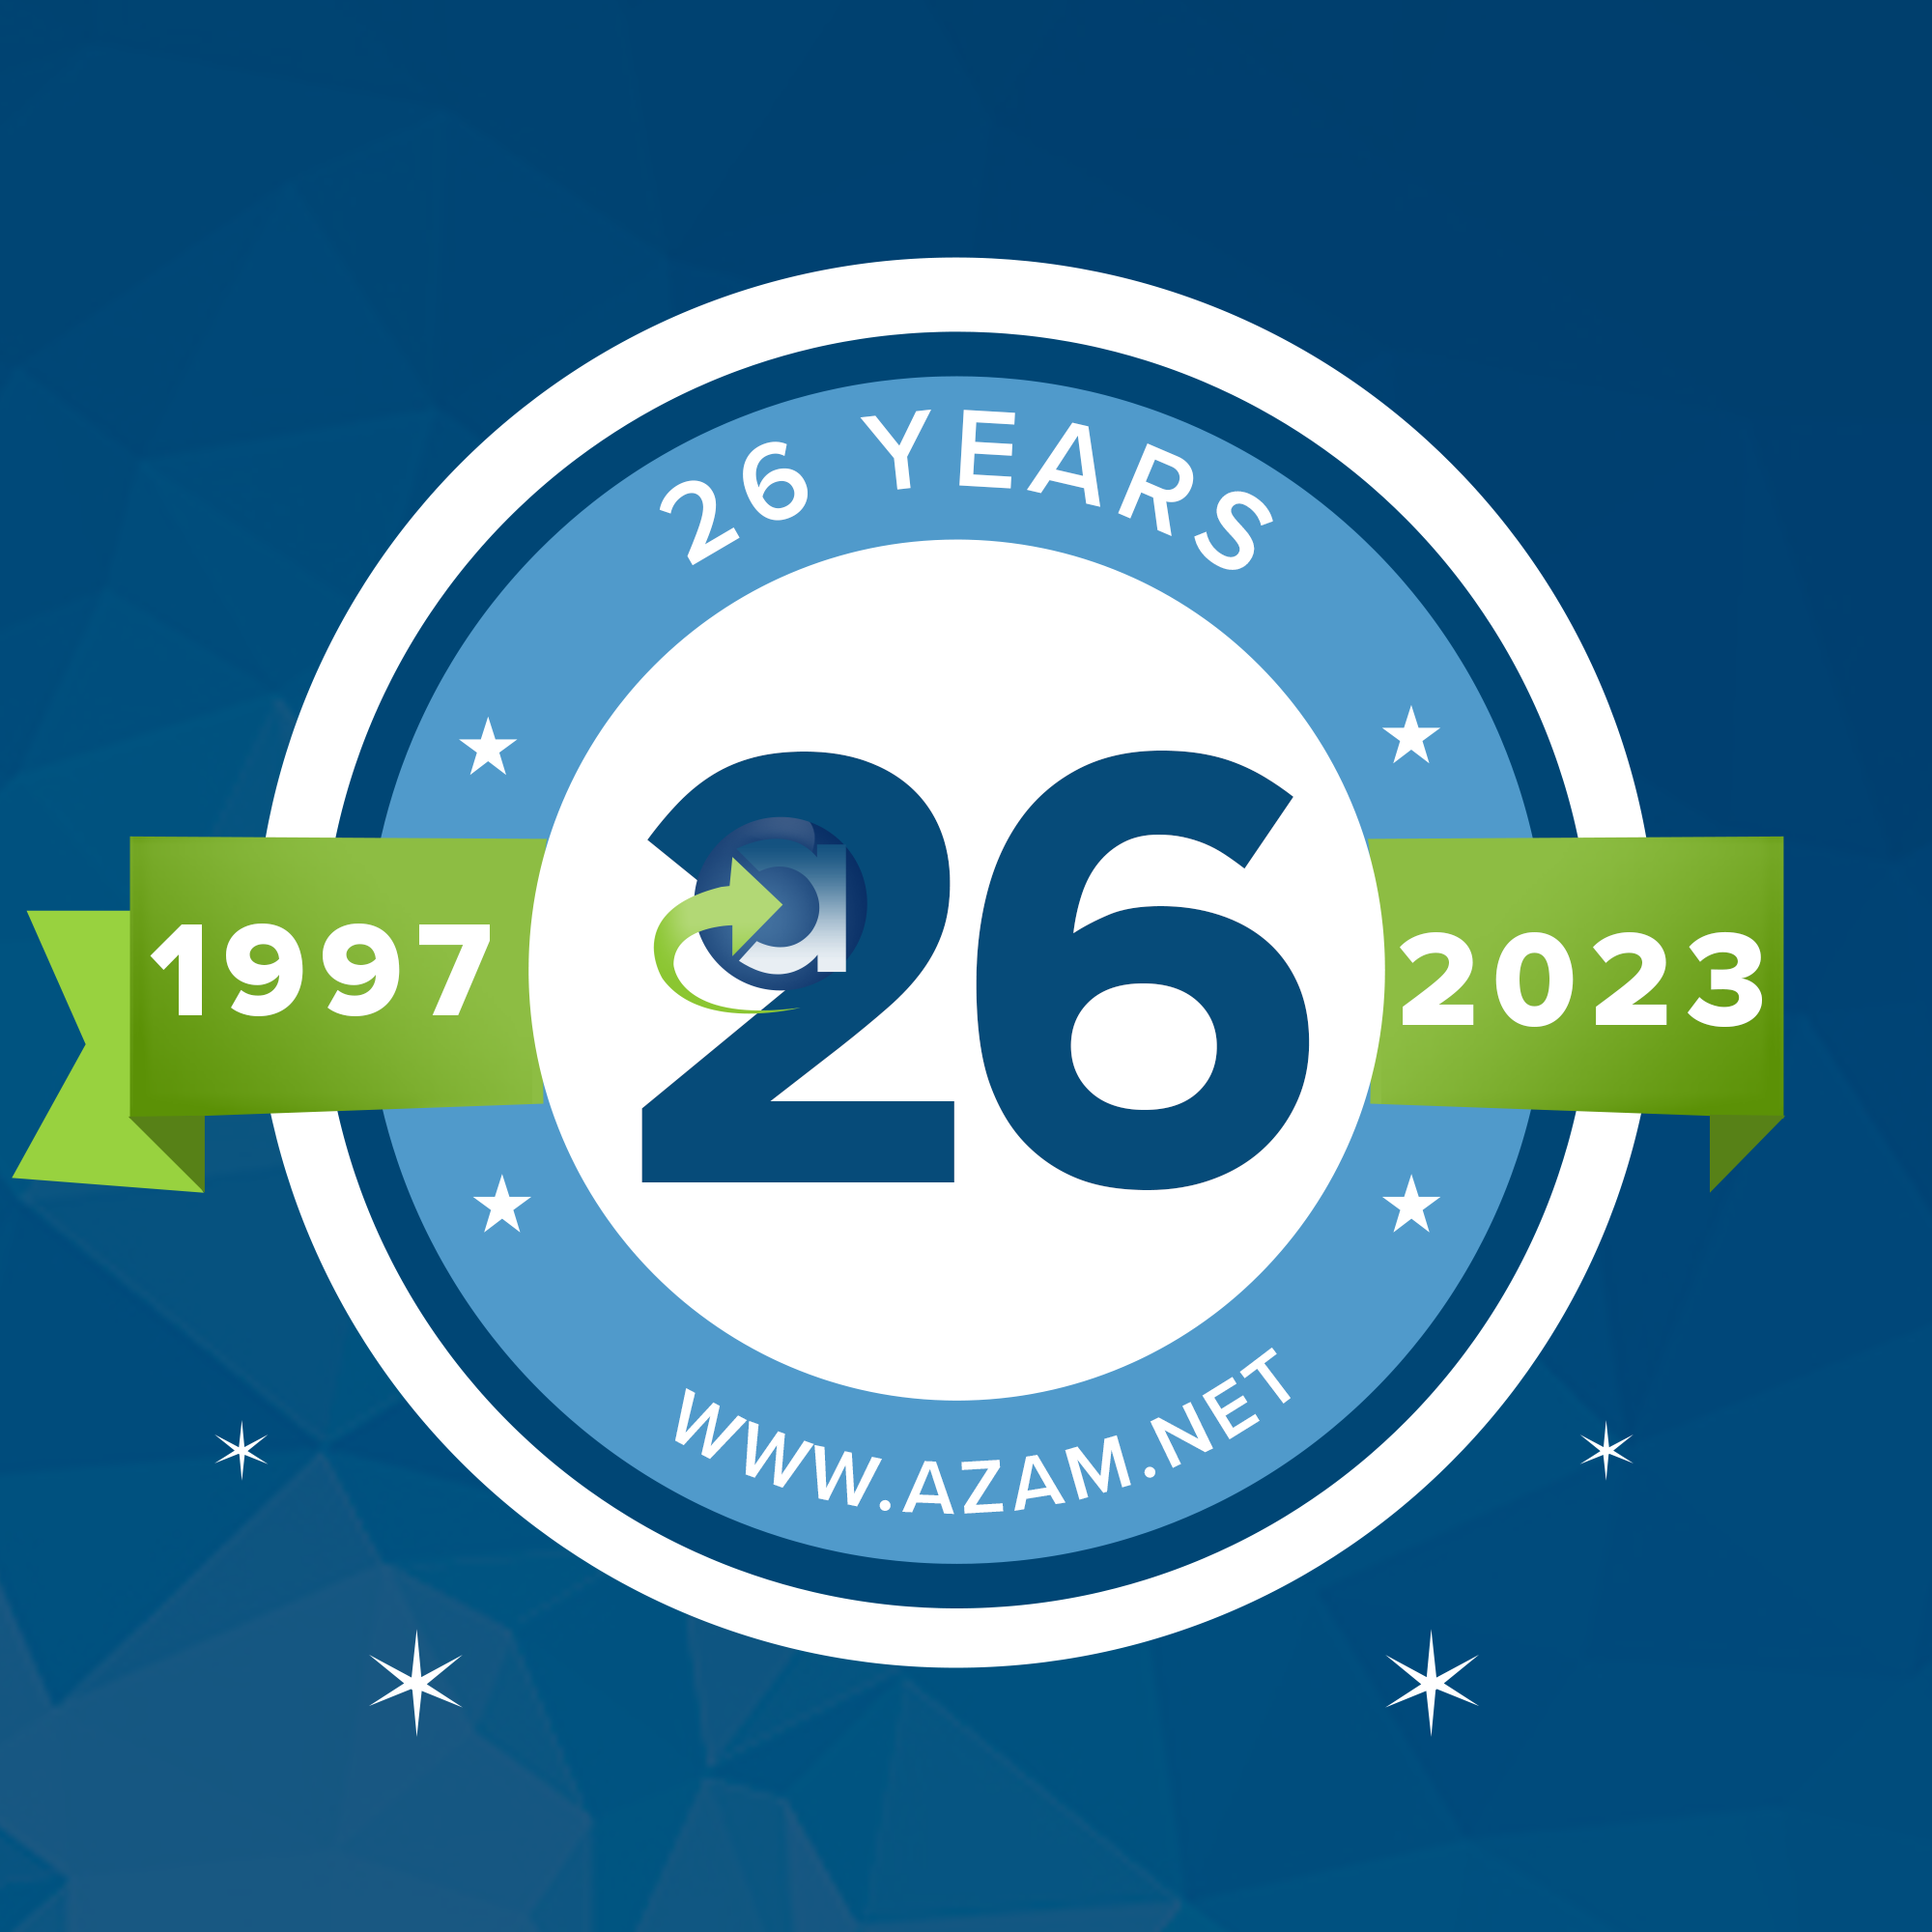 We are proud to be celebrating our milestone 25th anniversary. Why risk your time and money with less experienced agencies? Your work will usually be done by junior staff just learning the ropes and getting to understand what our experts already knew decades ago. Go here to contact us